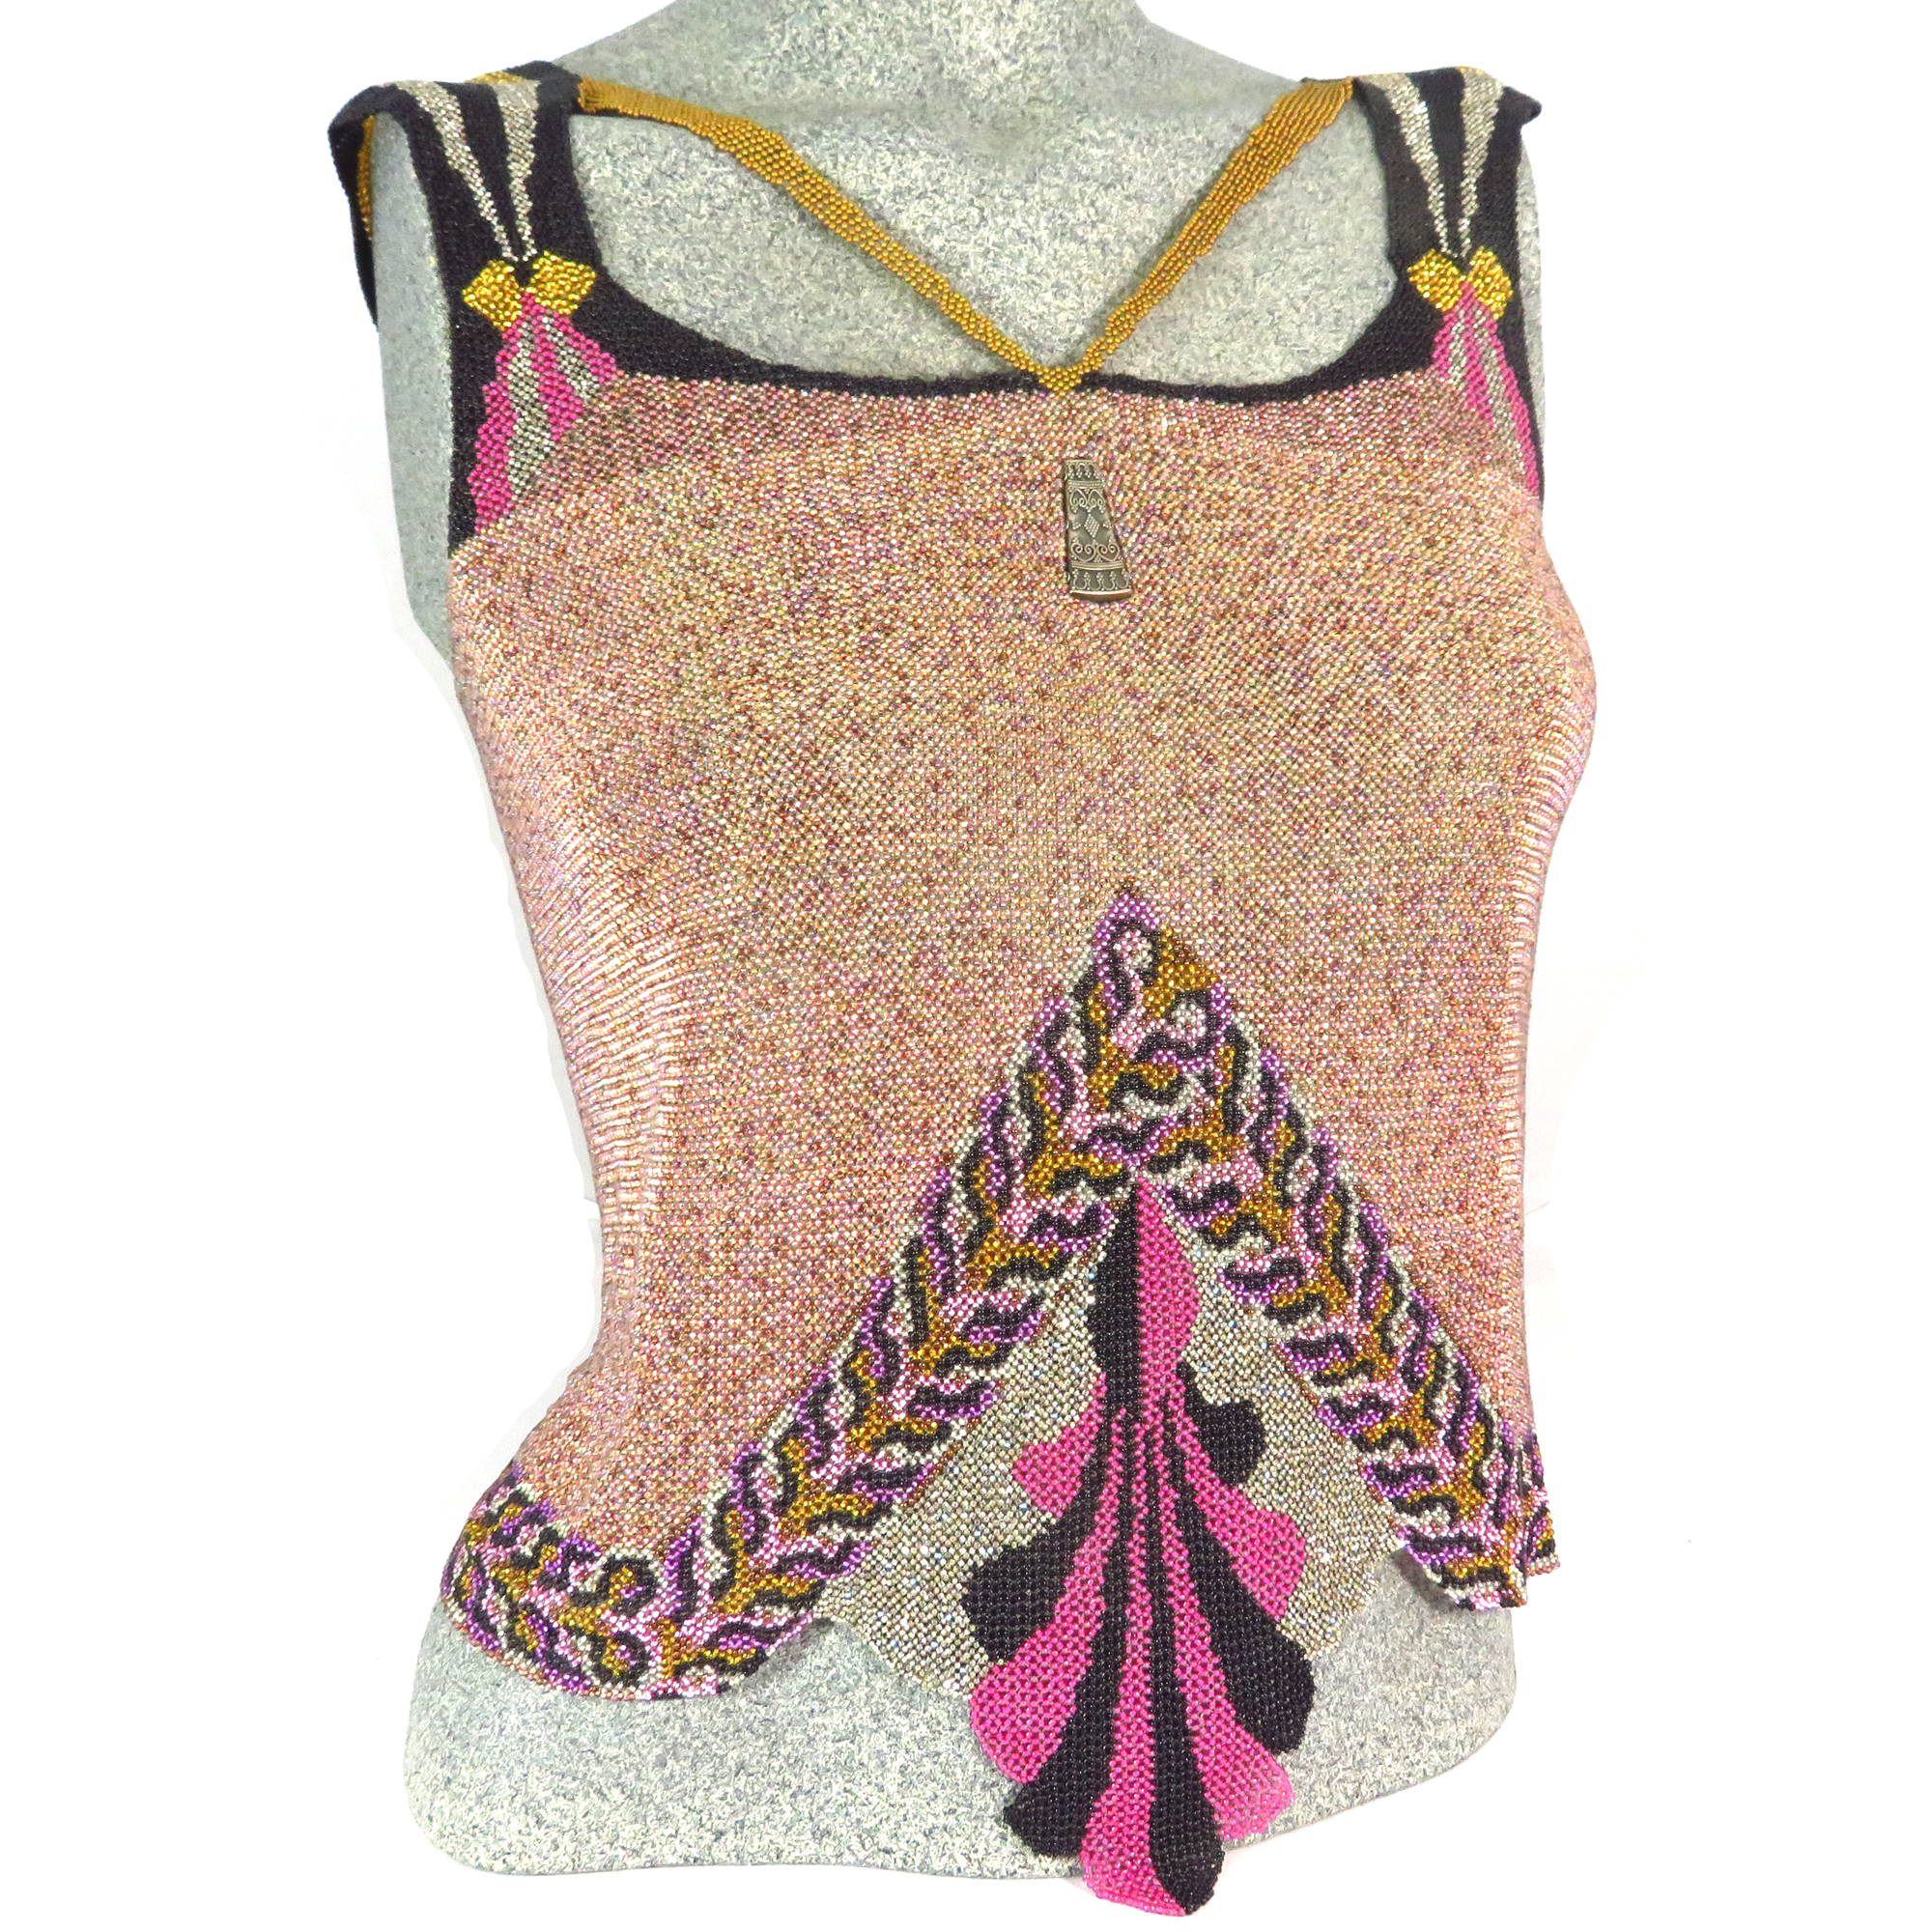 Art Deco women's evening top, one of a kind beaded fashion, artisan clothing by Bonnie Van Hall